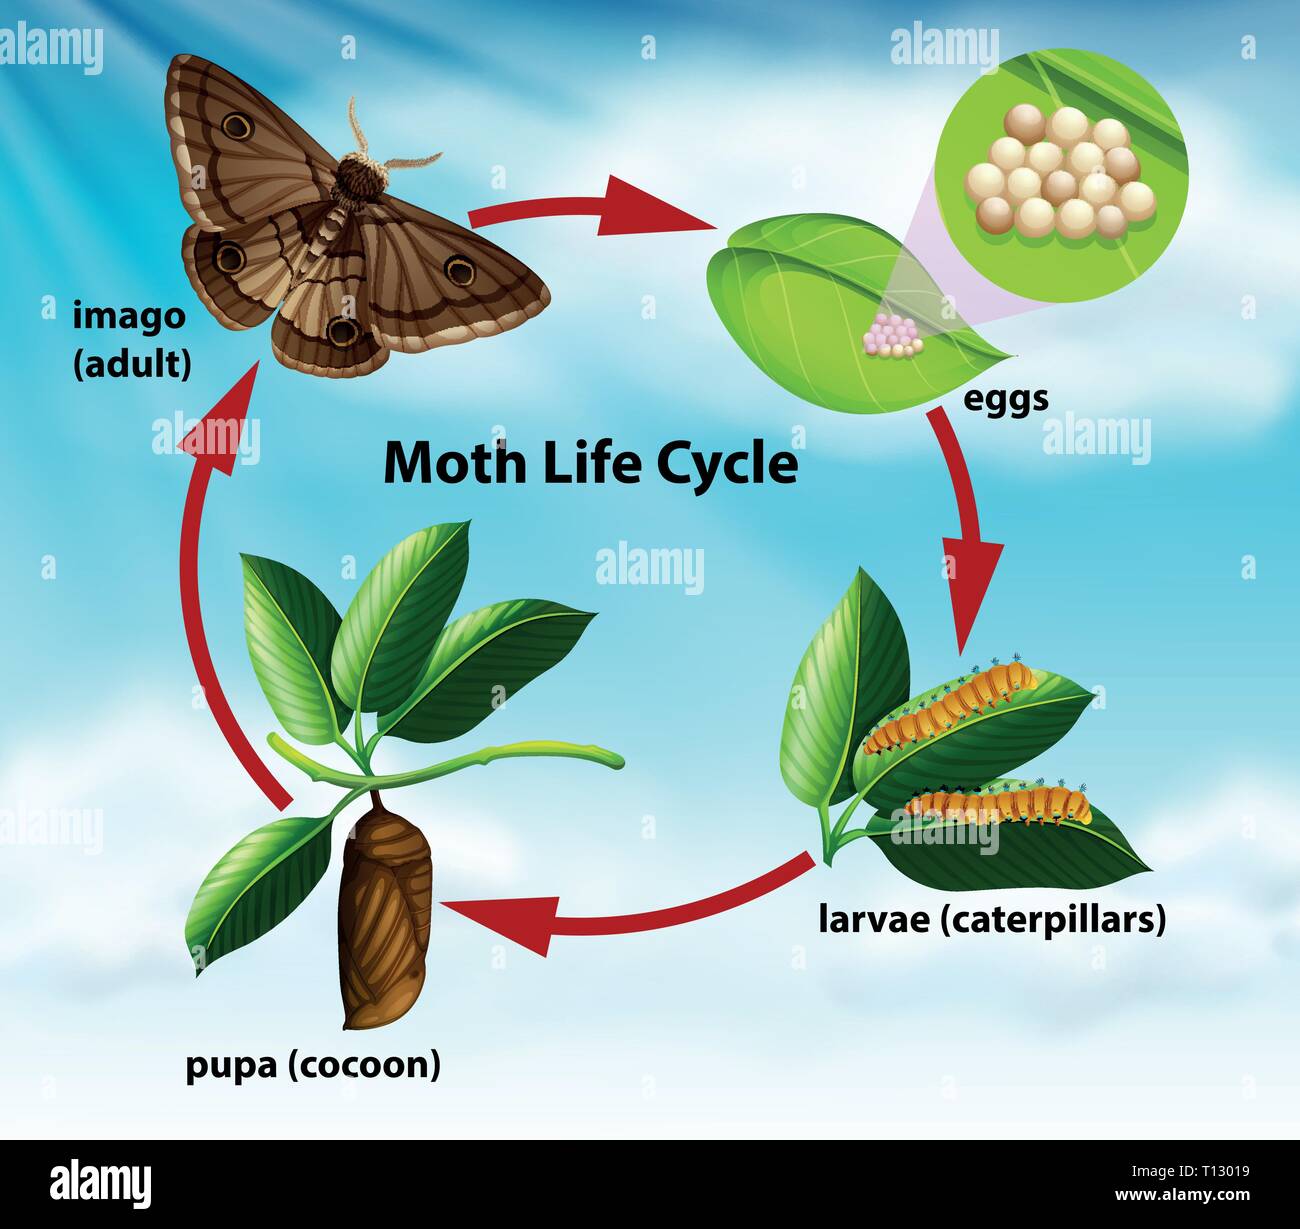 Indian Meal Moth Life Cycle